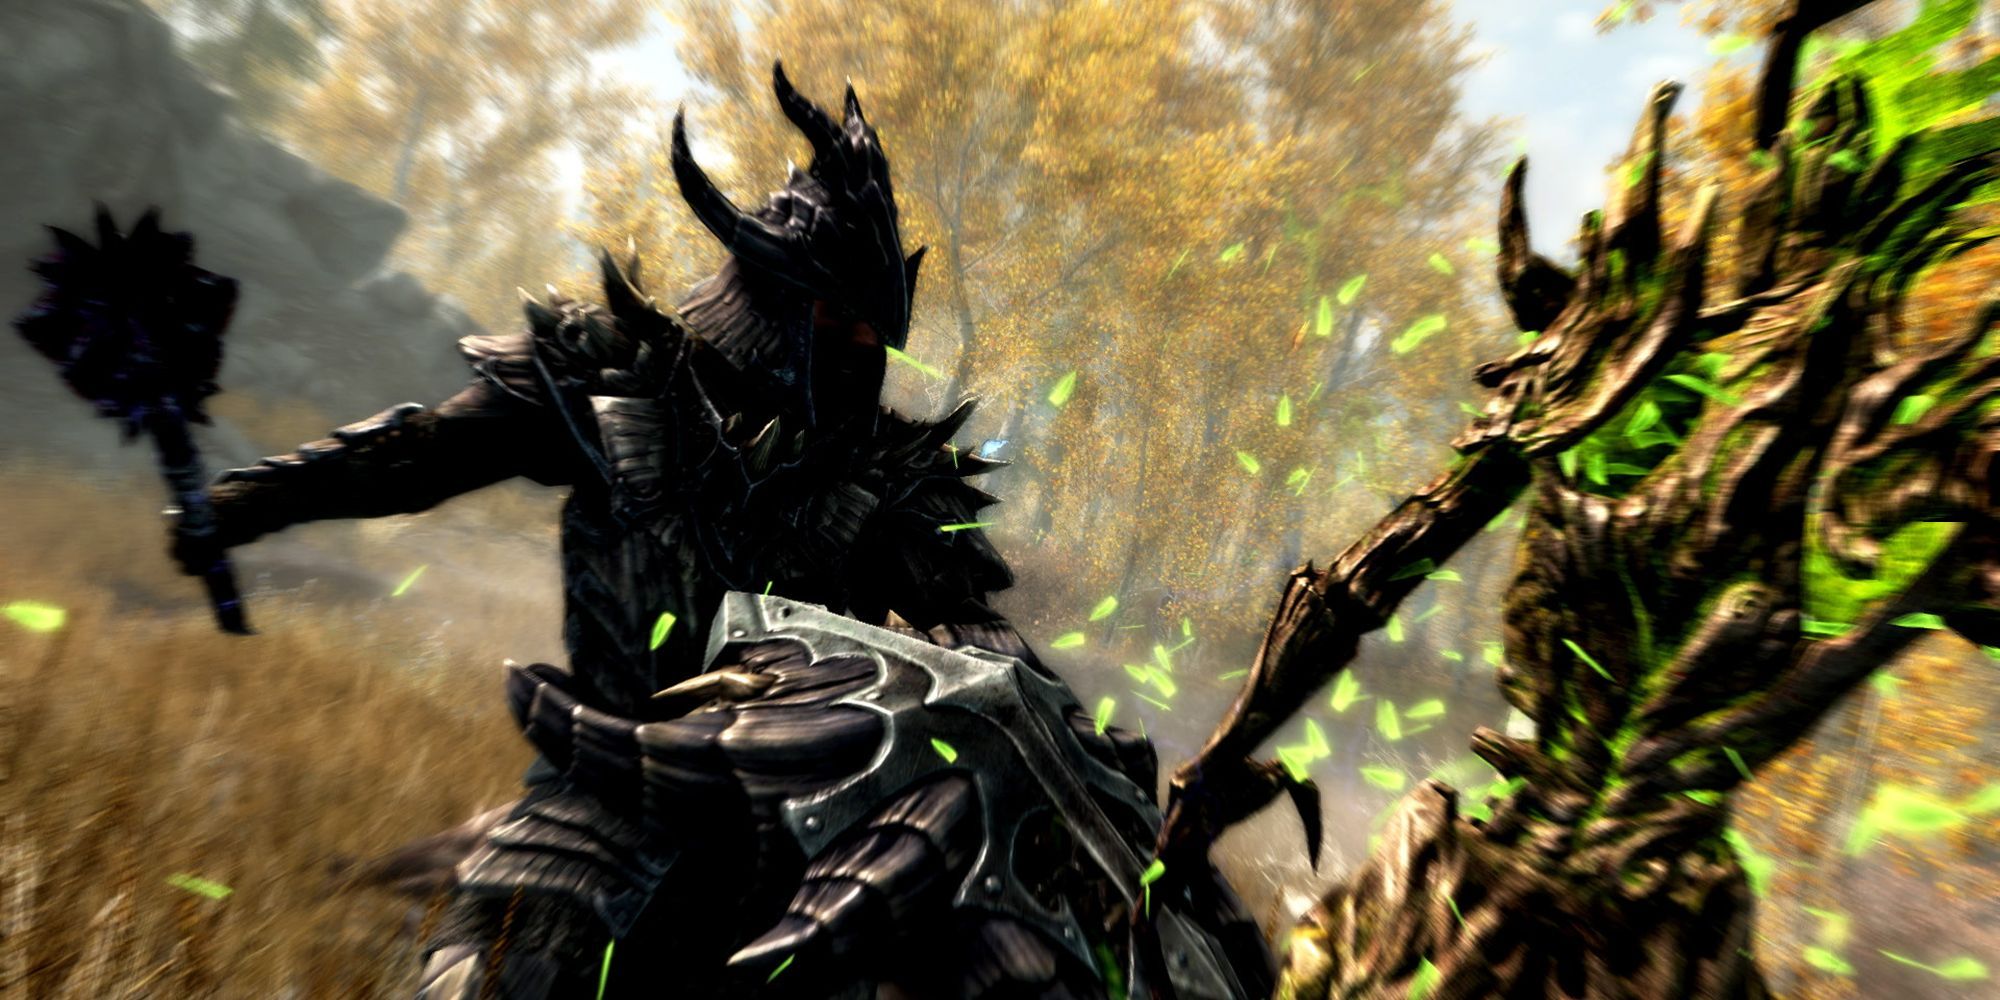 A player character fights a monster in Skyrim.